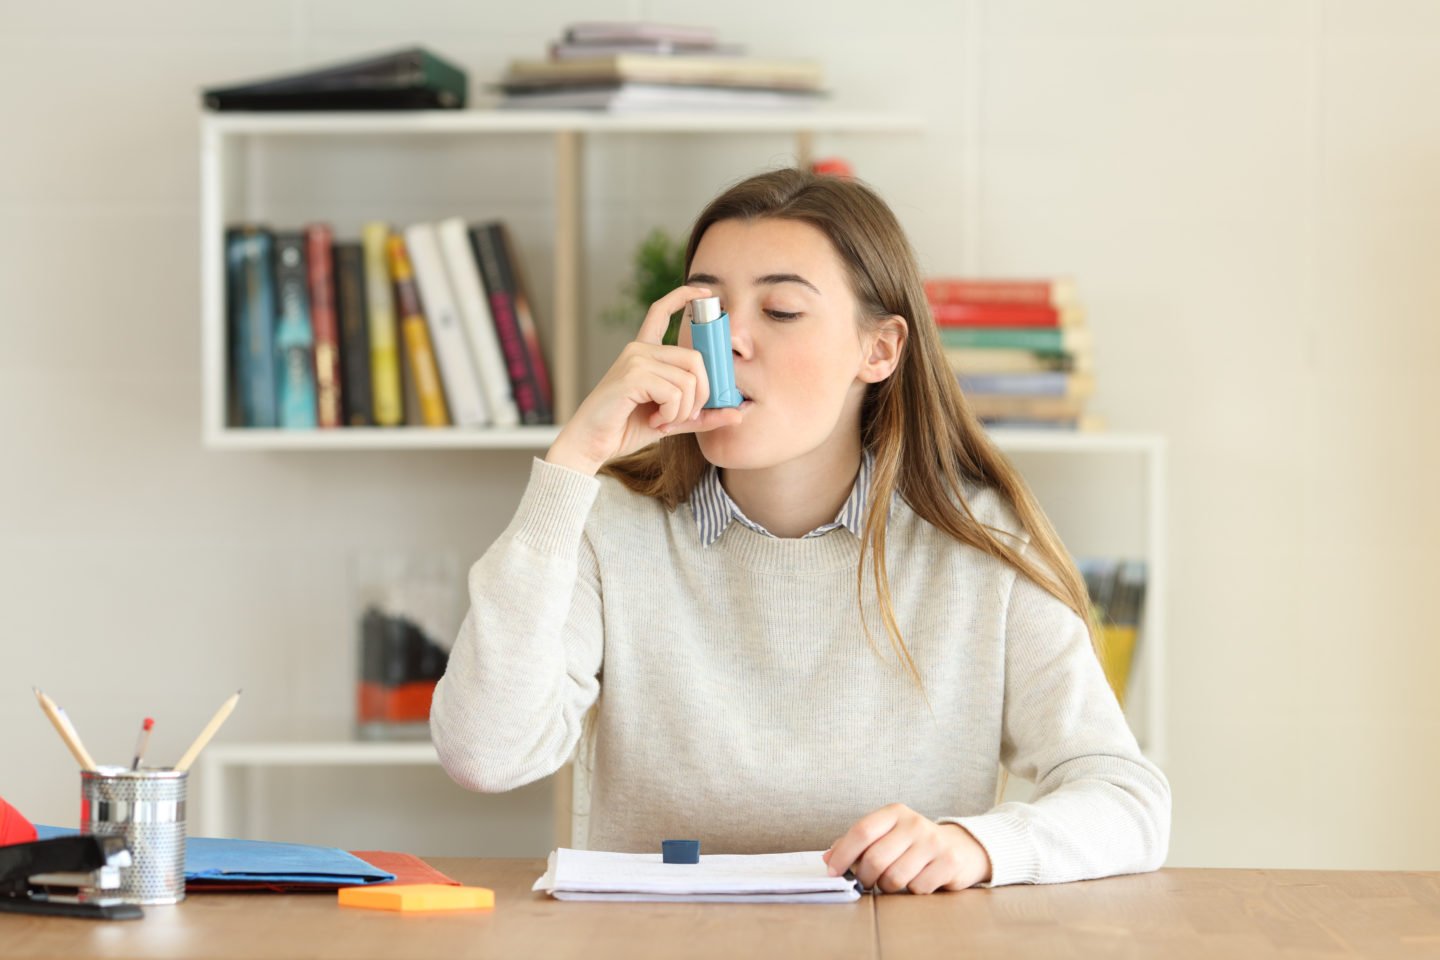 University Risk for Students with Asthma